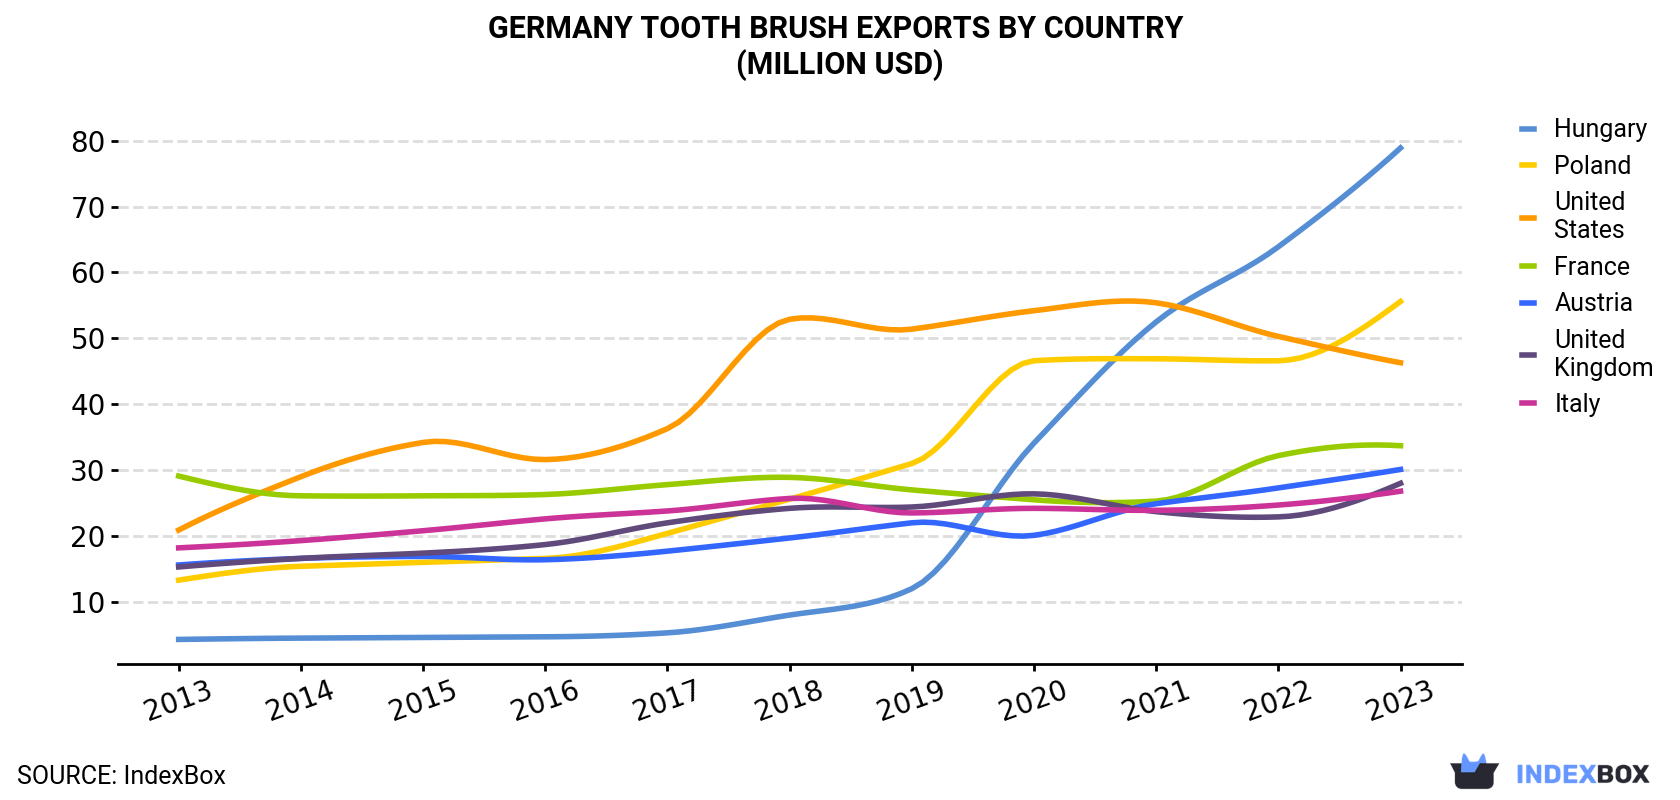 Germany Tooth Brush Exports By Country (Million USD)